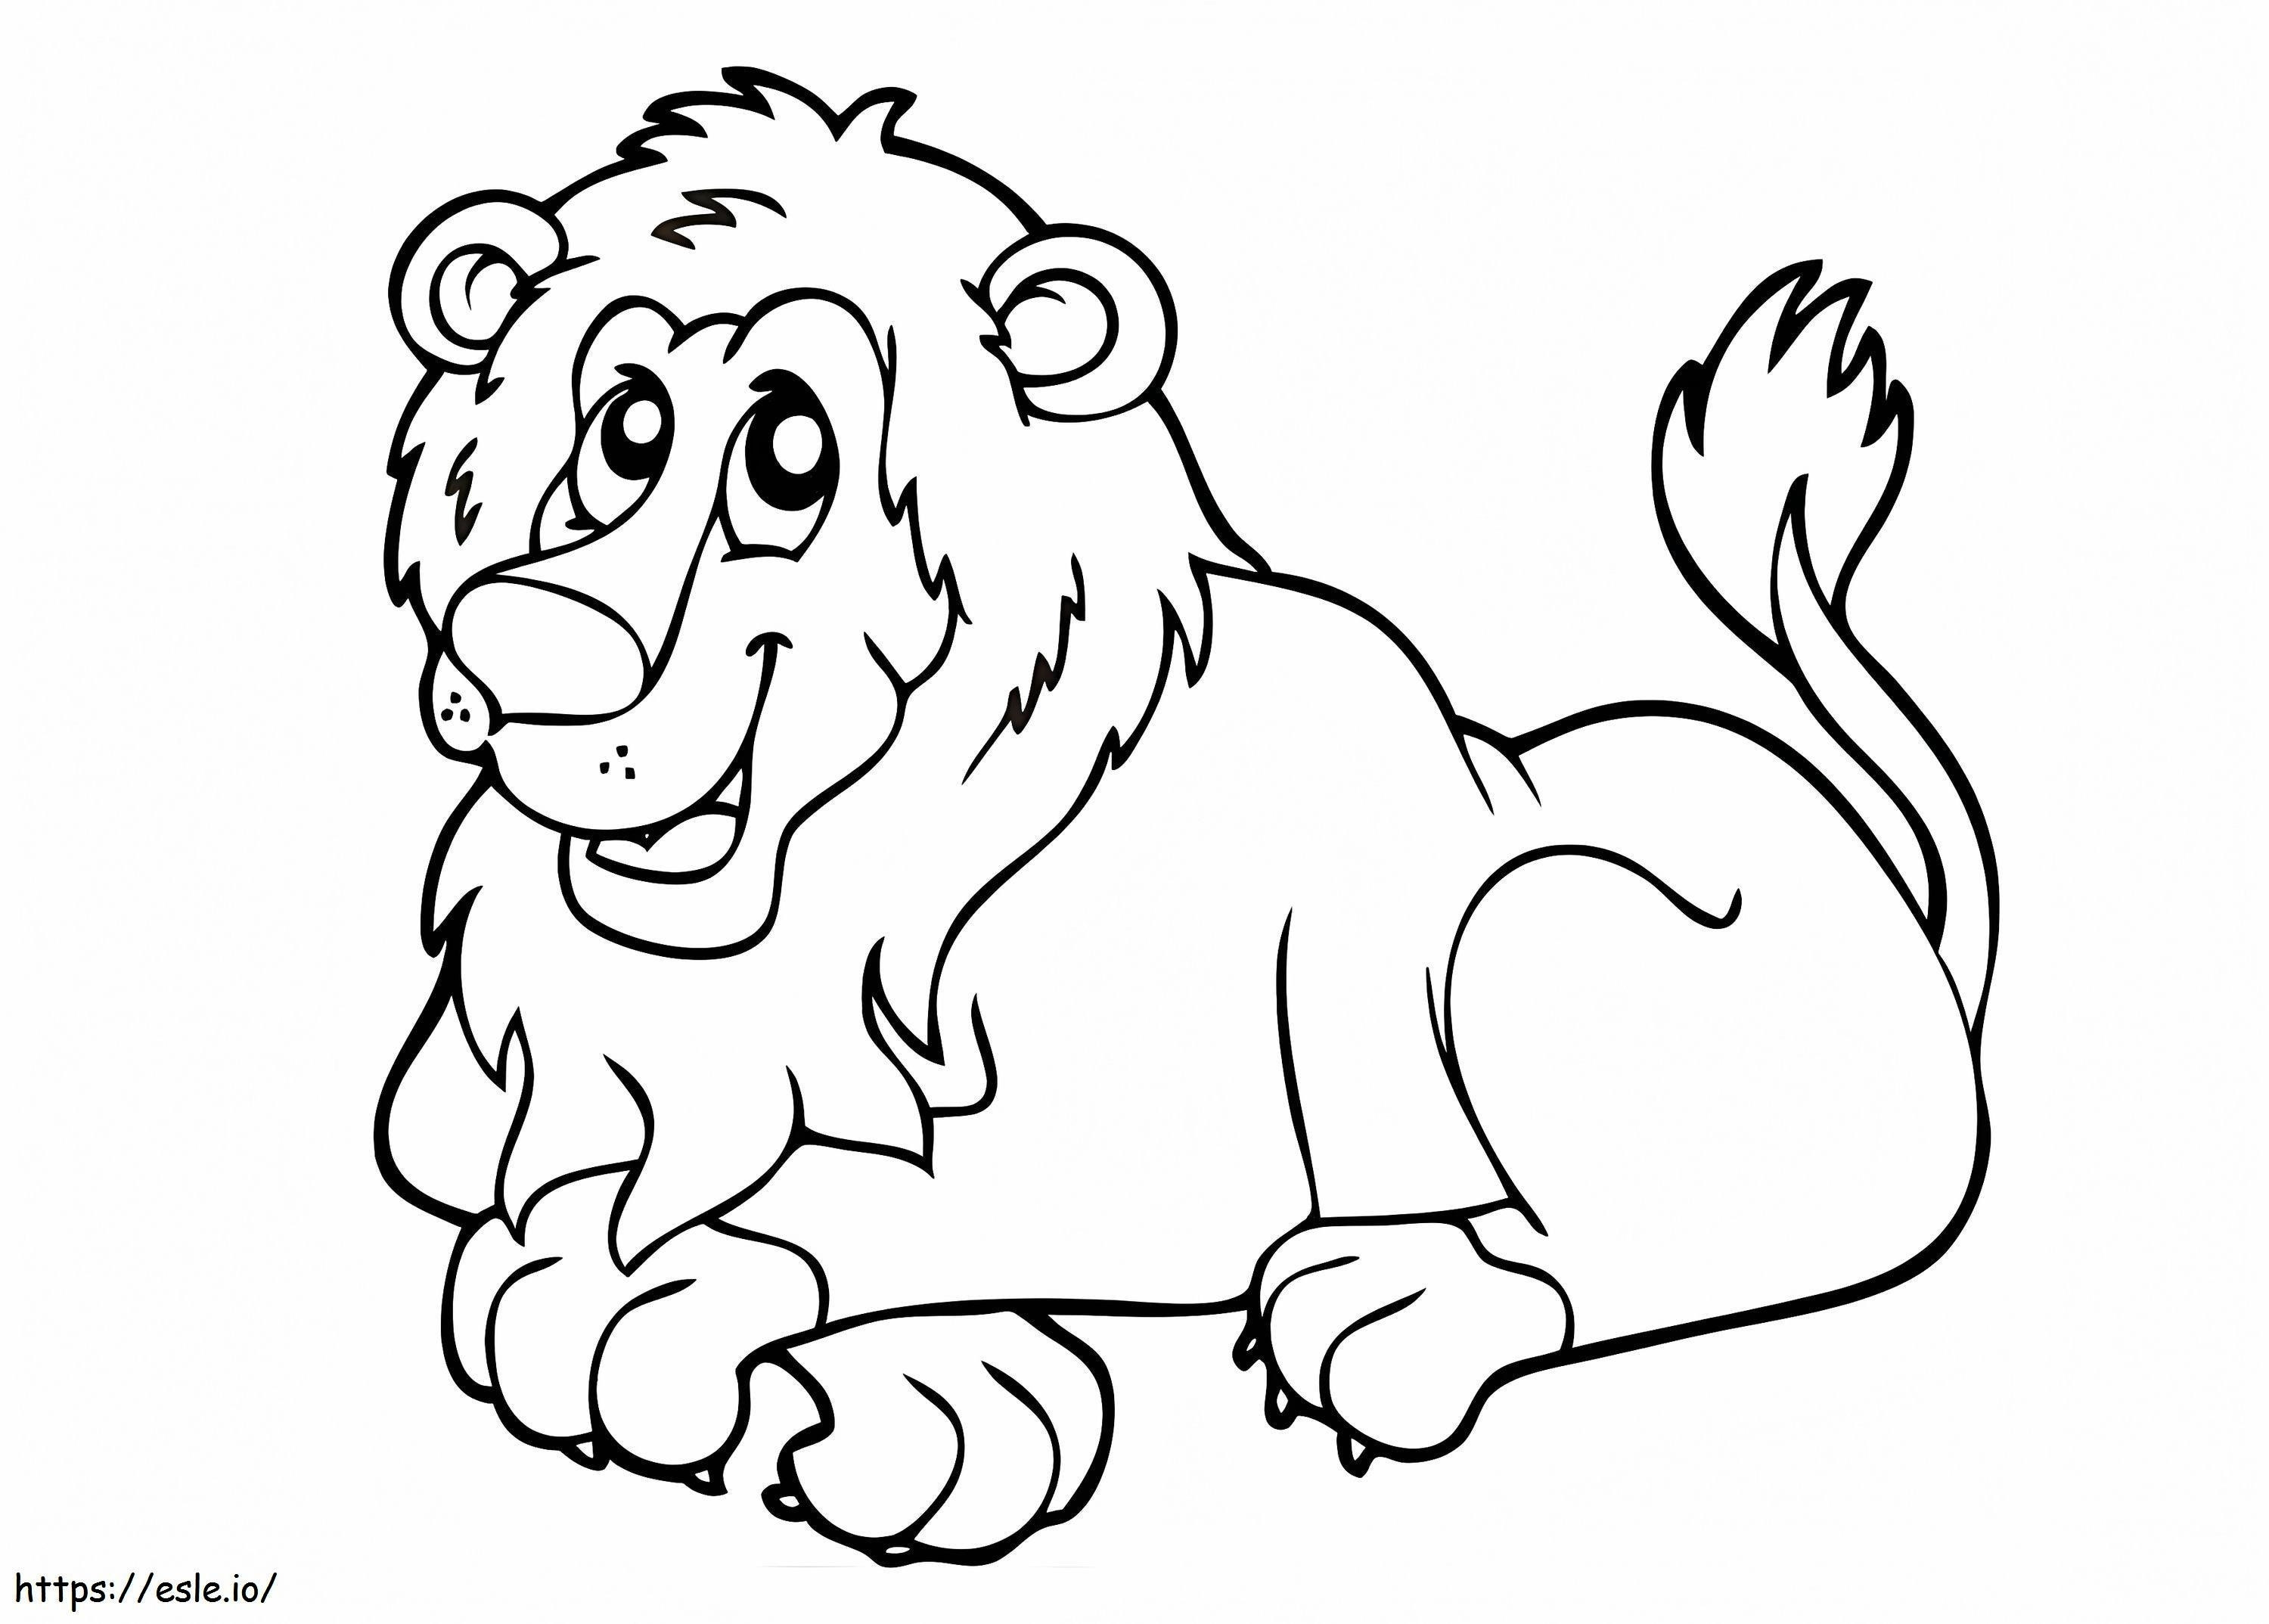 Lion Smiling coloring page